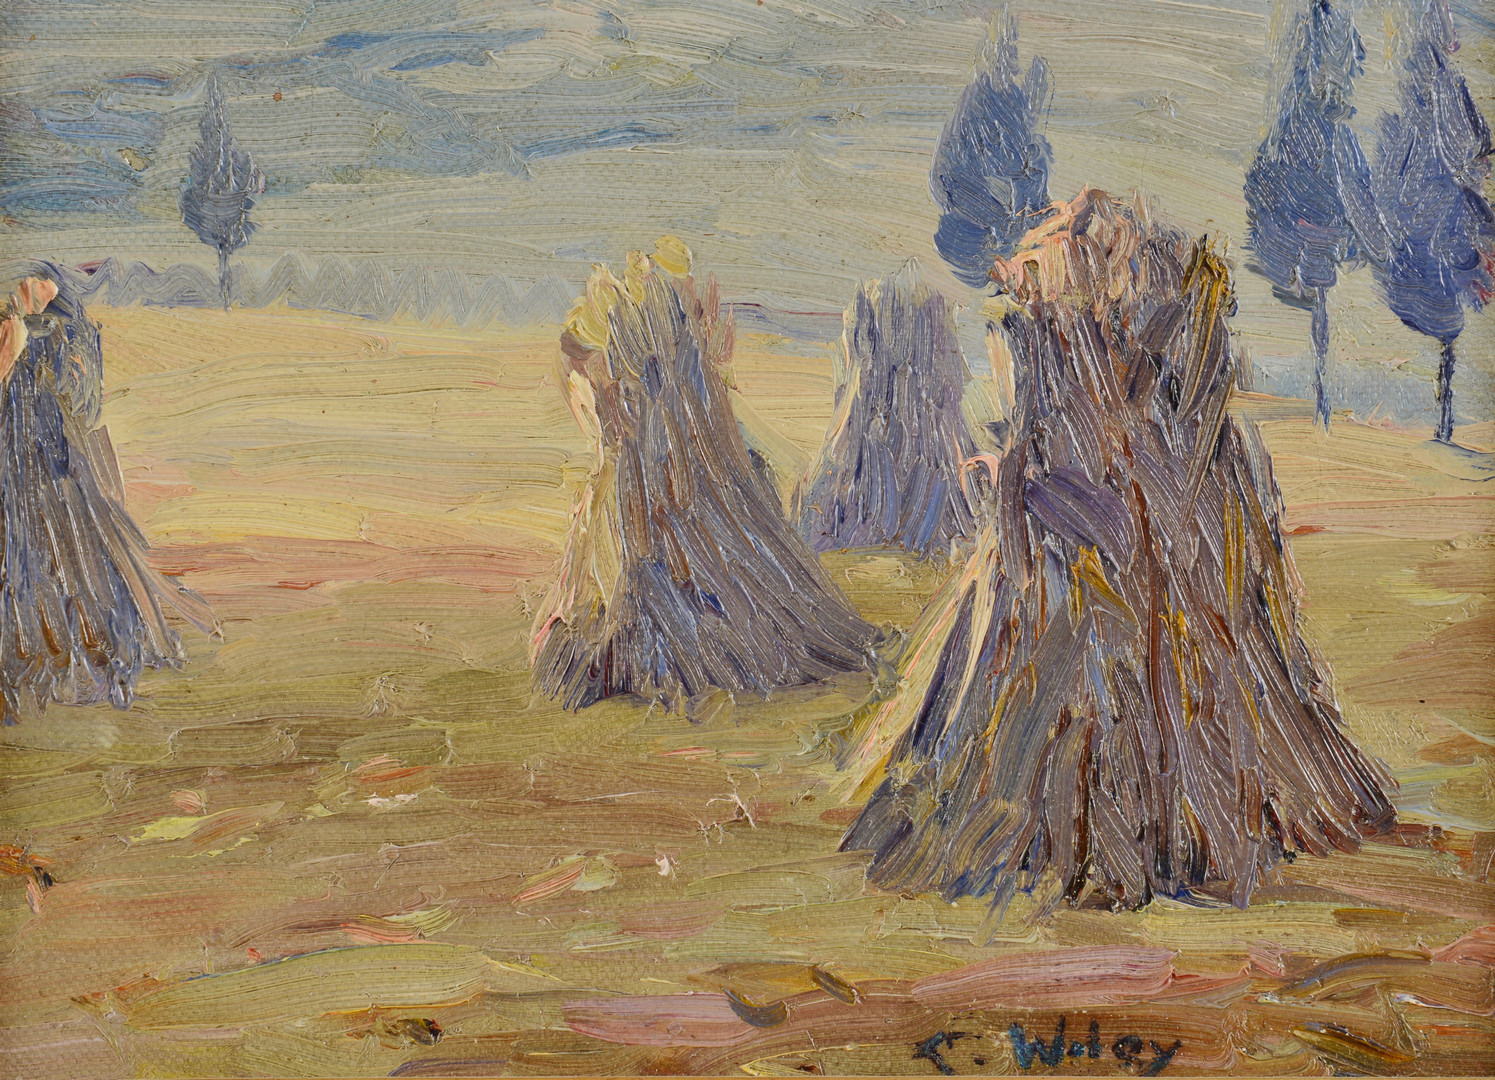 Lot 181: Catherine Wiley, O/C Mountain Landscape